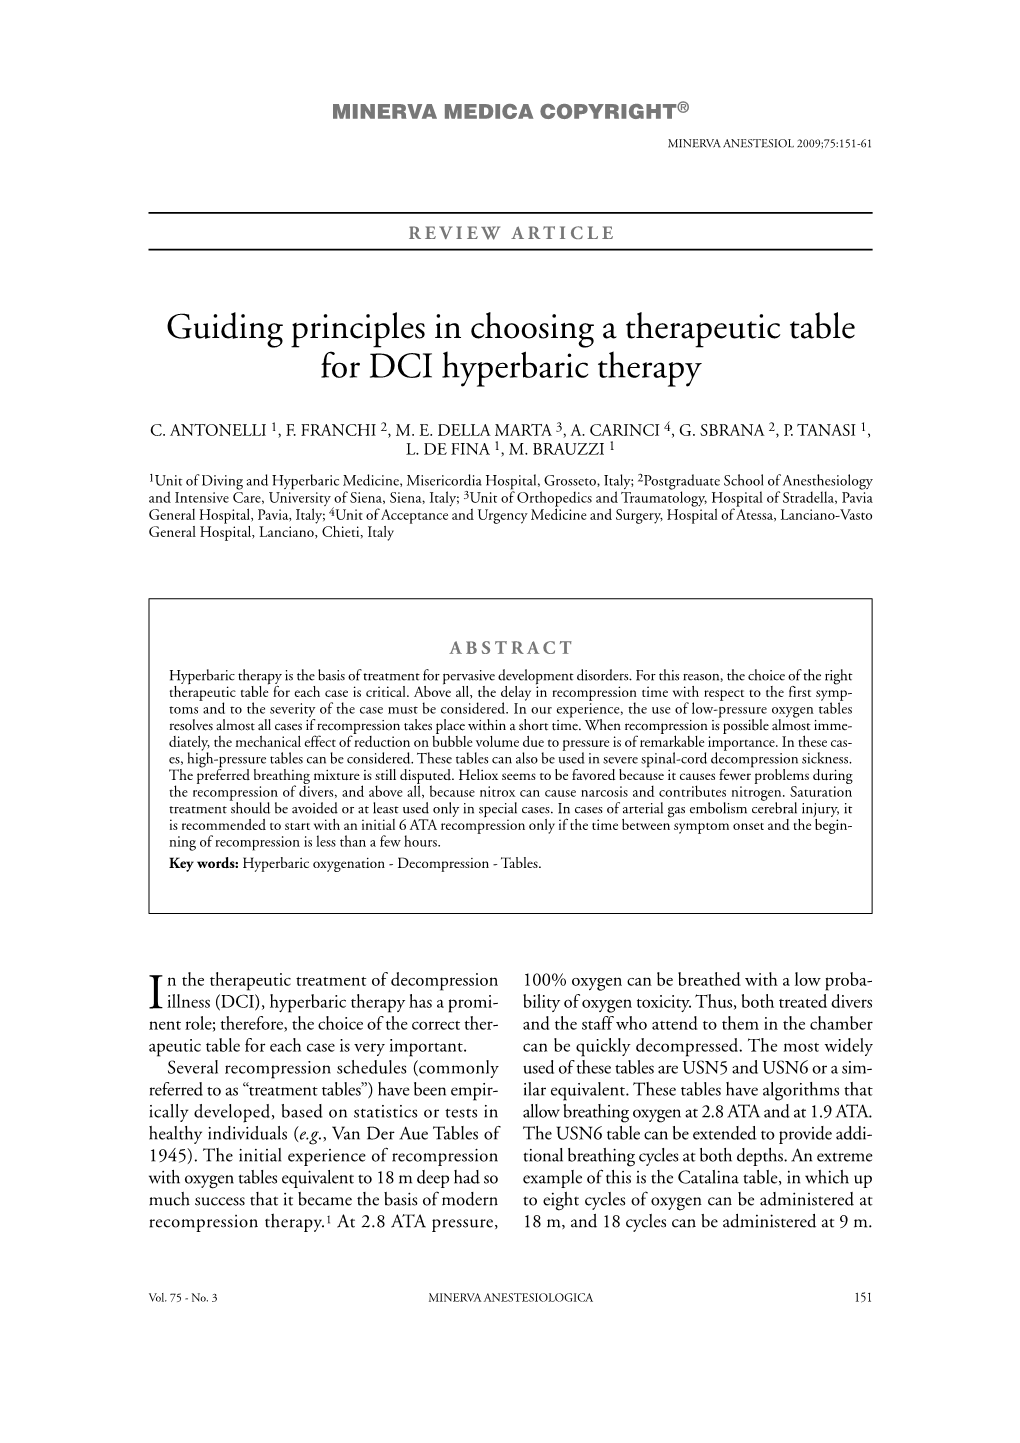 Guiding Principles in Choosing a Therapeutic Table for DCI Hyperbaric Therapy